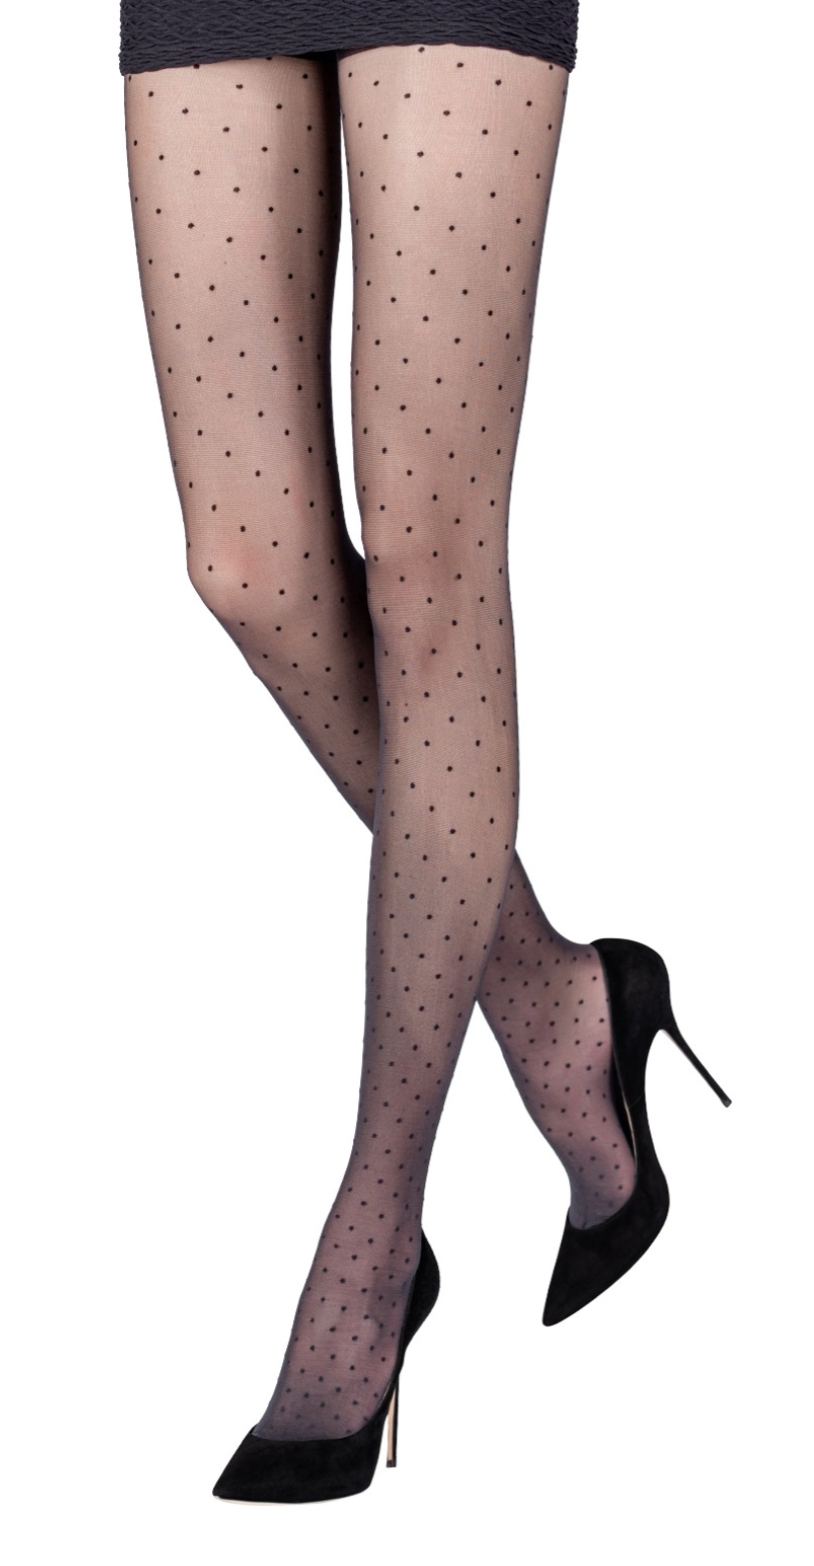 Emilio Cavallini Twisted Plumetis Tights - Sheer black soft matte fashion tights with an all over woven spot pattern. Worn with black mini skirt and back stiletto heal shoes.